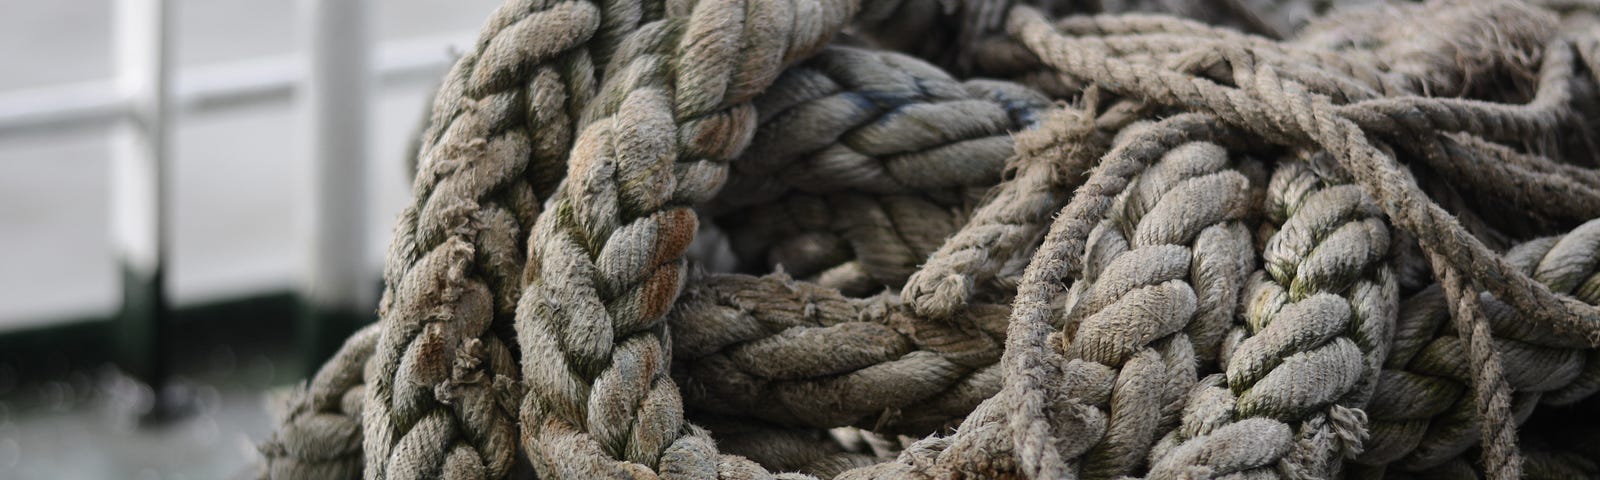 A pile of tangle of rope.